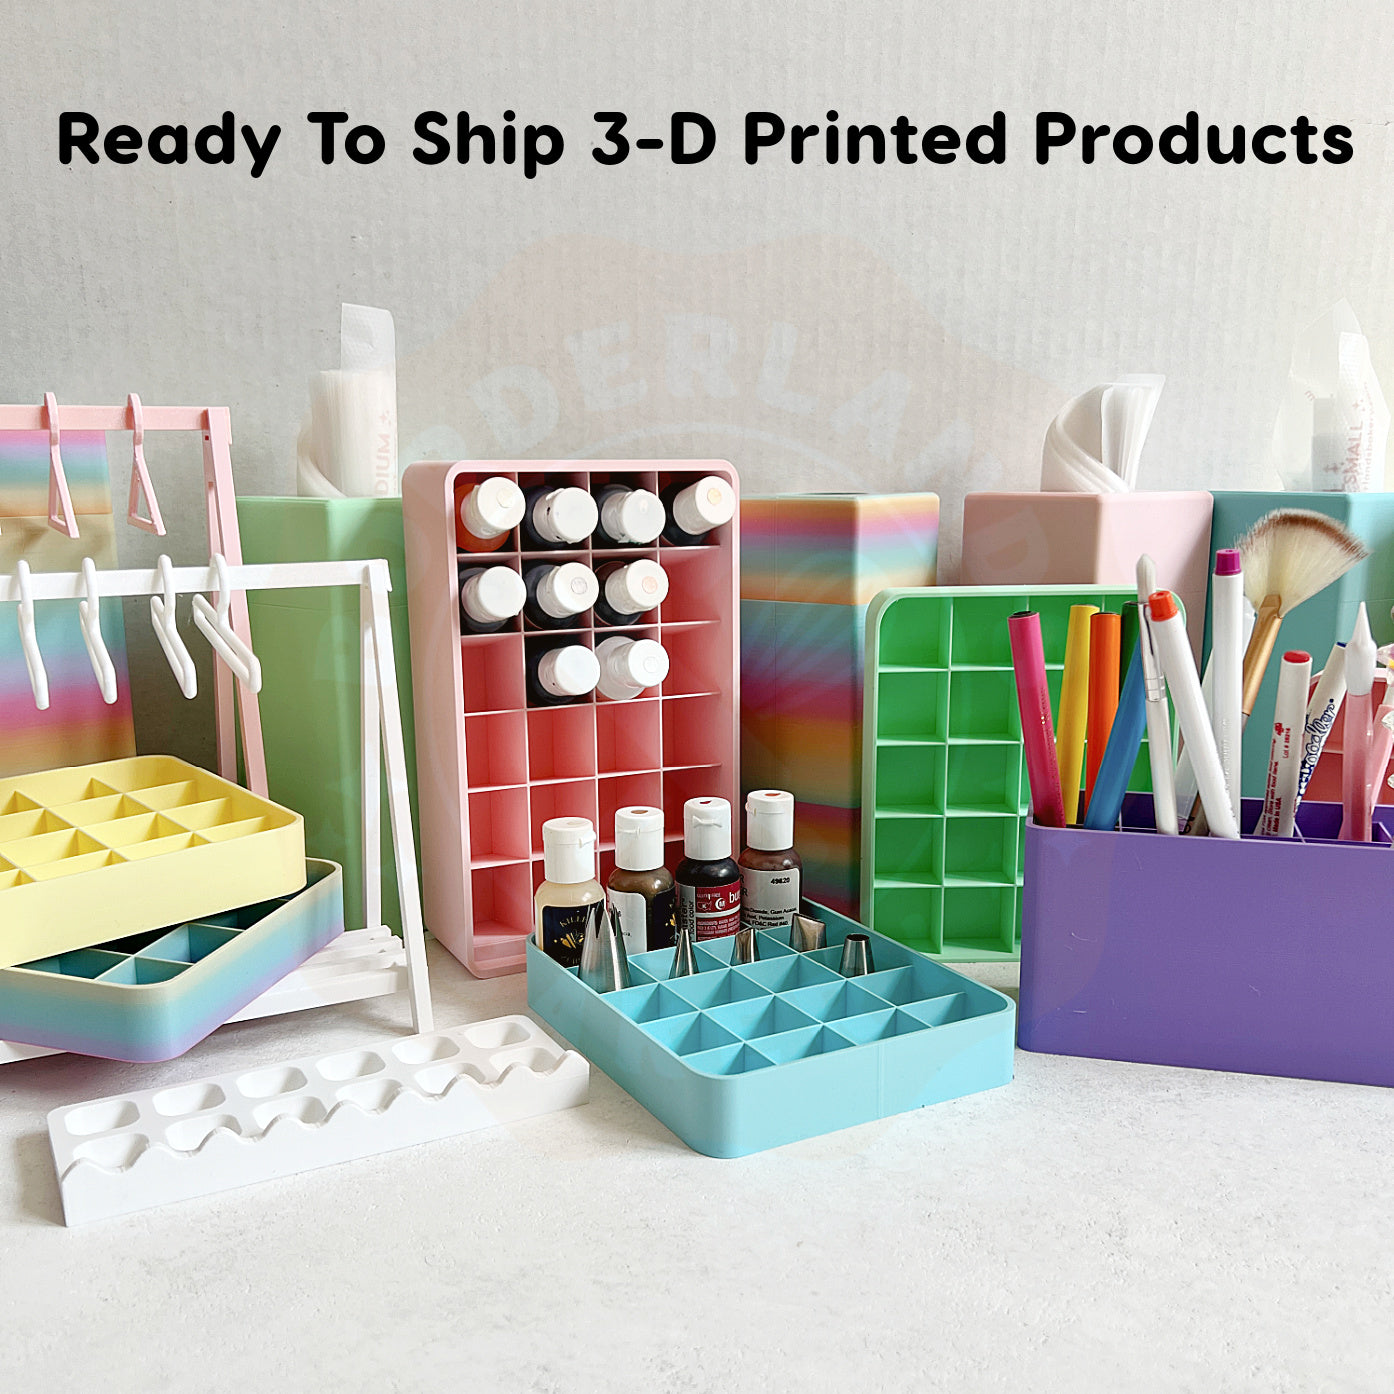 Ready To Ship 3D Printed Products